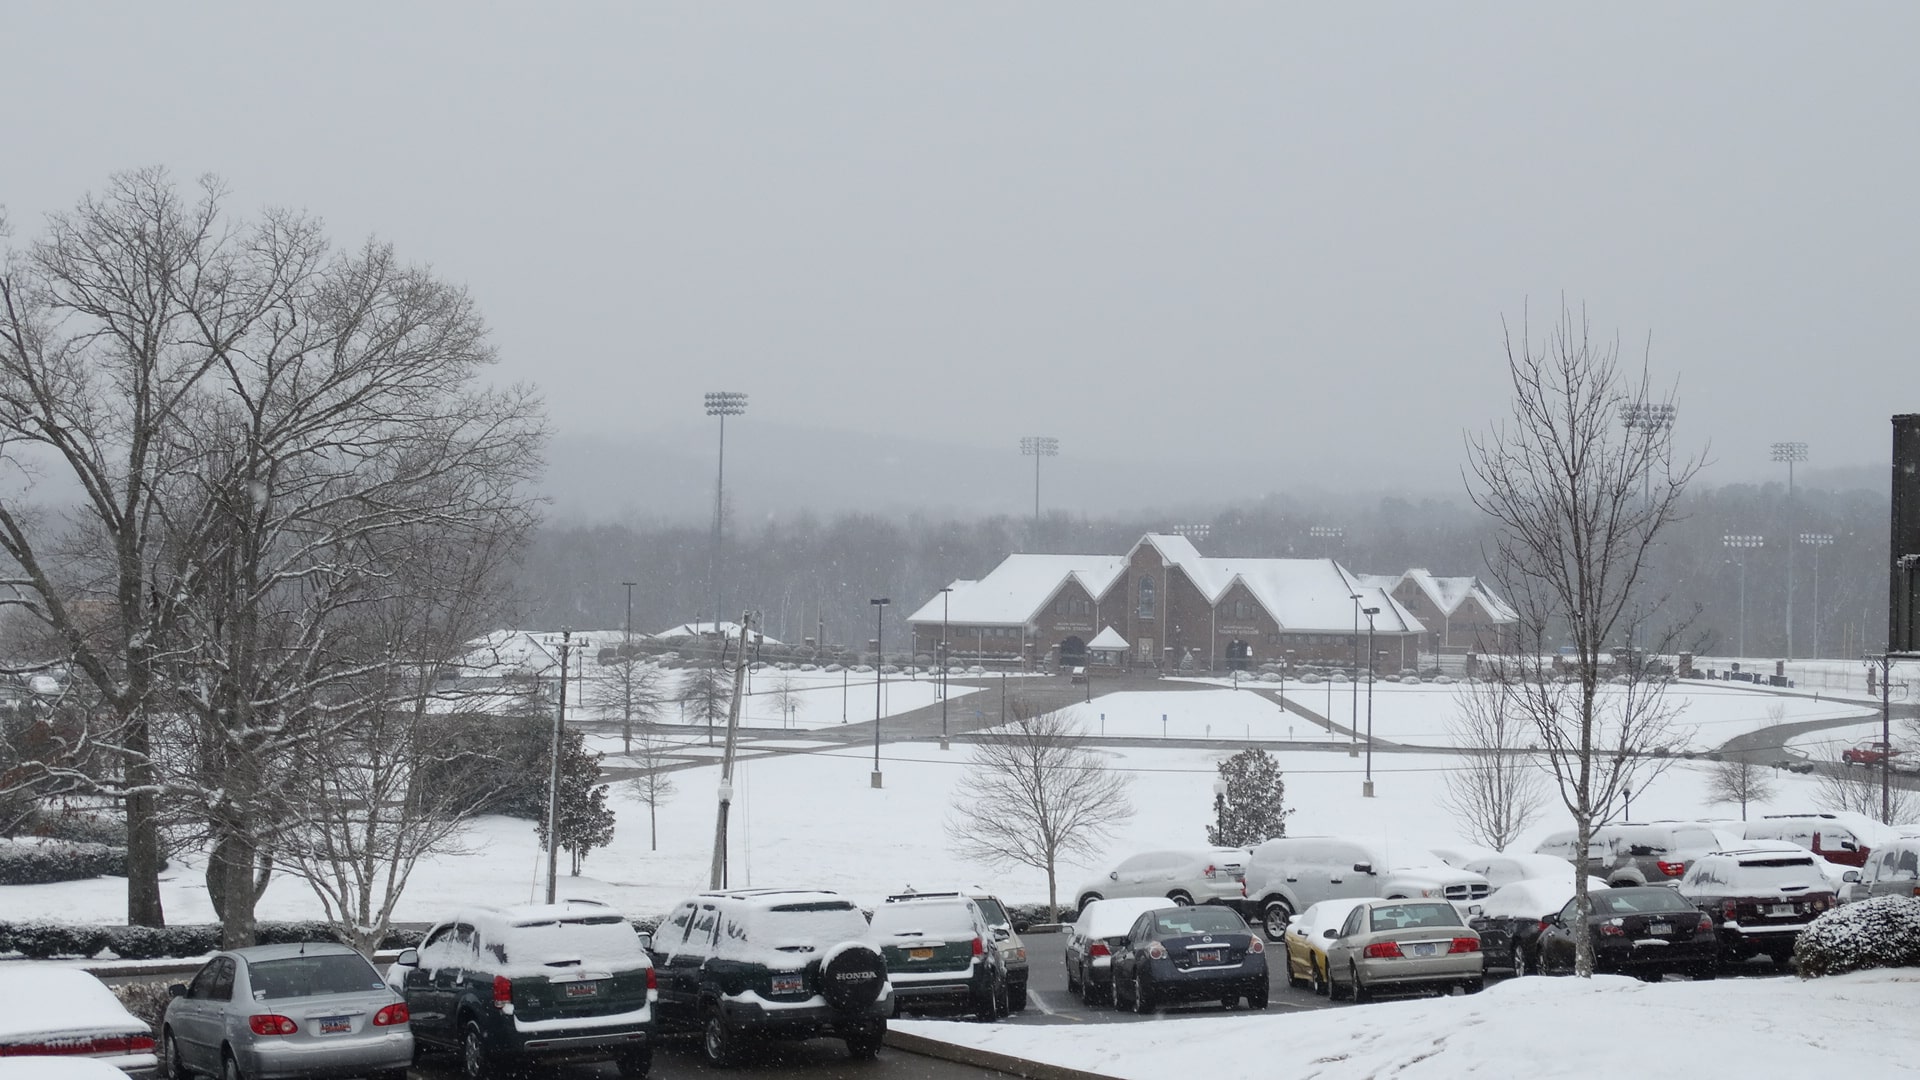 Photo by Alex Miller, Snow blanketed the campus